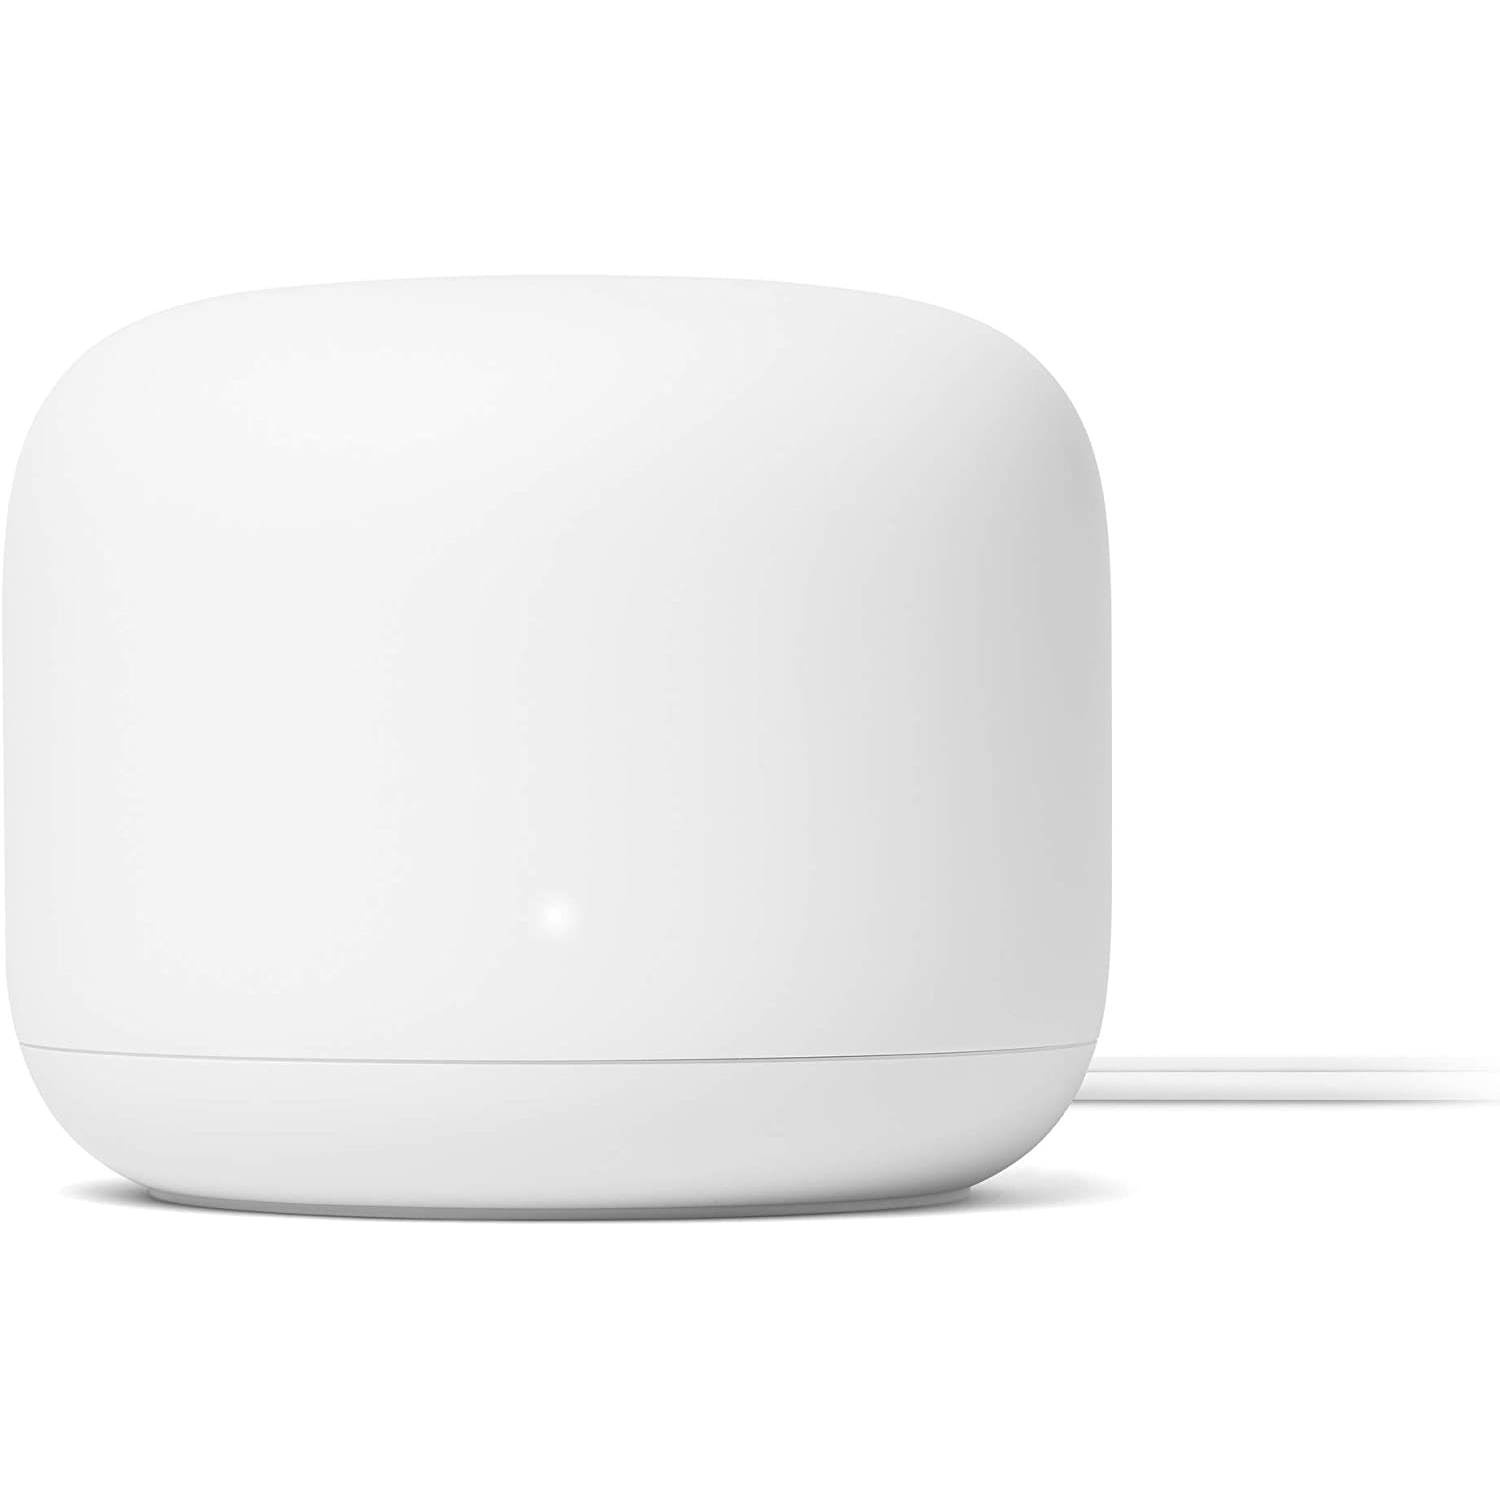 Google Nest WiFi - AC2200 - Mesh WiFi System - WiFi Router - 2200 Sq Ft Coverage GA00595-US - 1 Pack